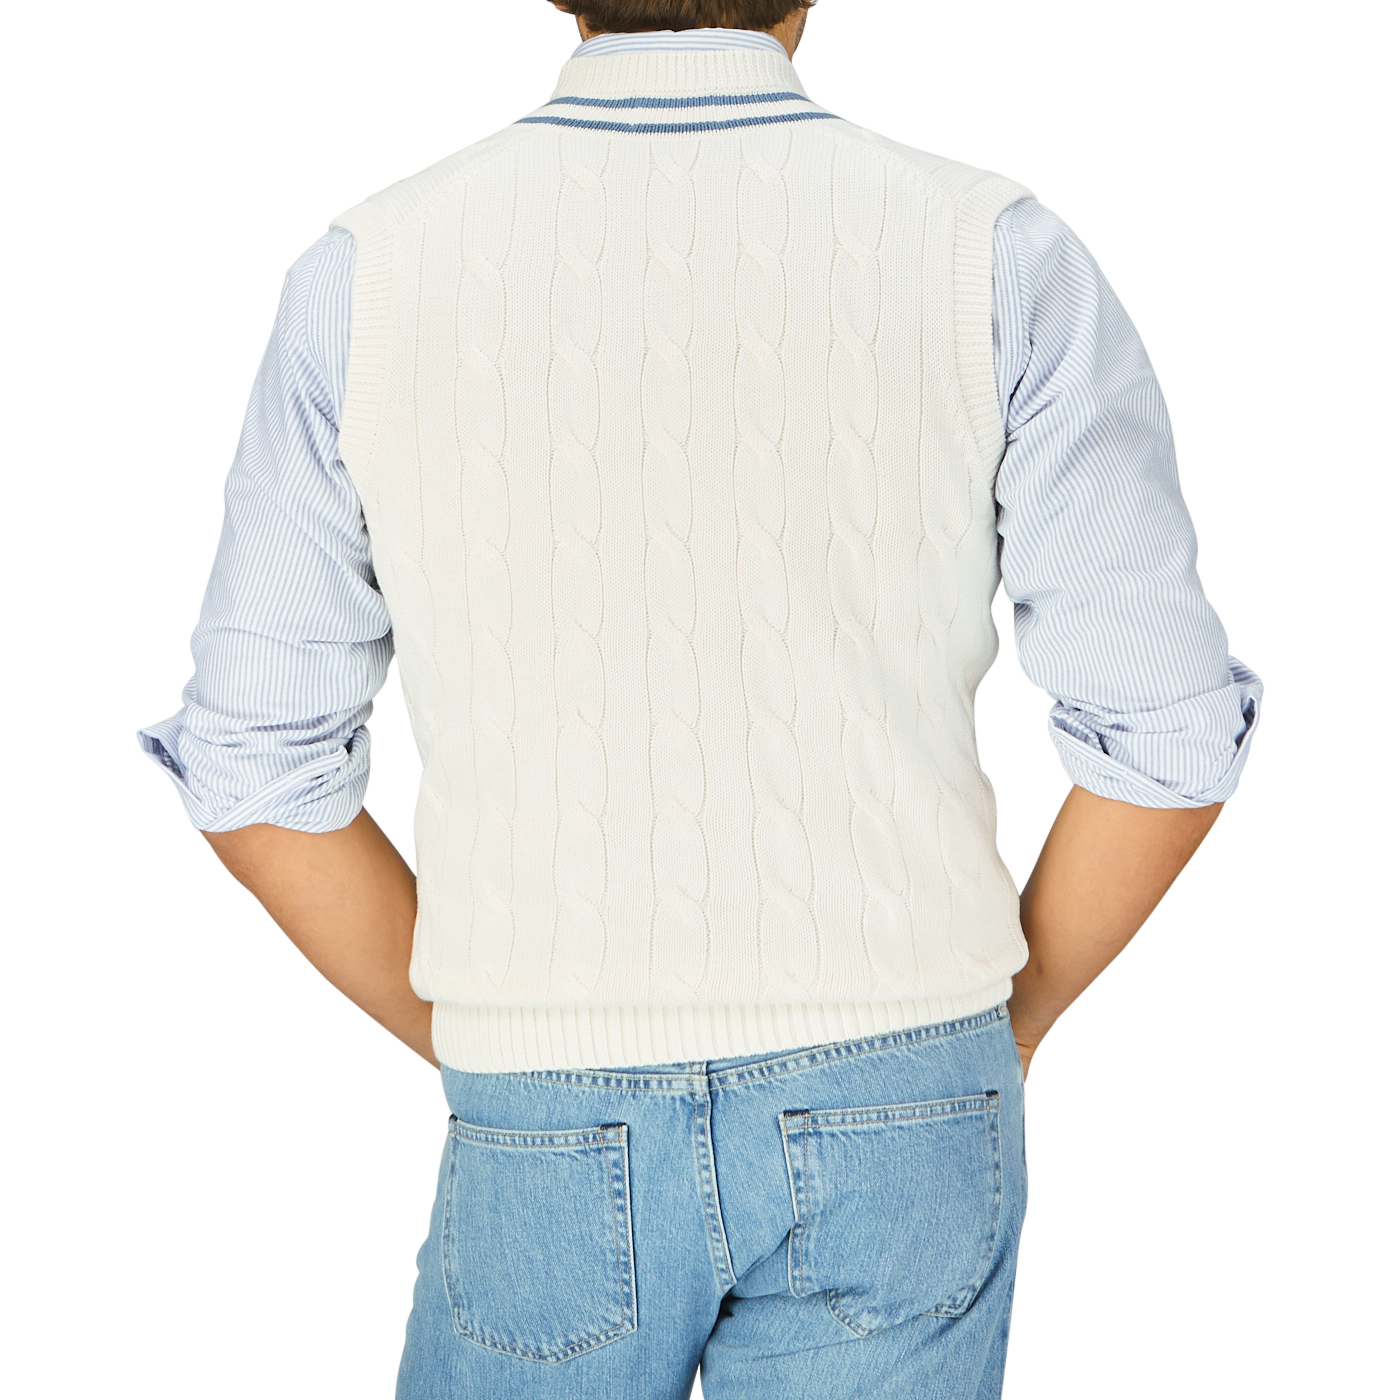 Person wearing an Off-White Blue Striped Cotton Cricket Slipover by Alan Paine over a blue and white striped shirt, paired with denim jeans, viewed from the back.